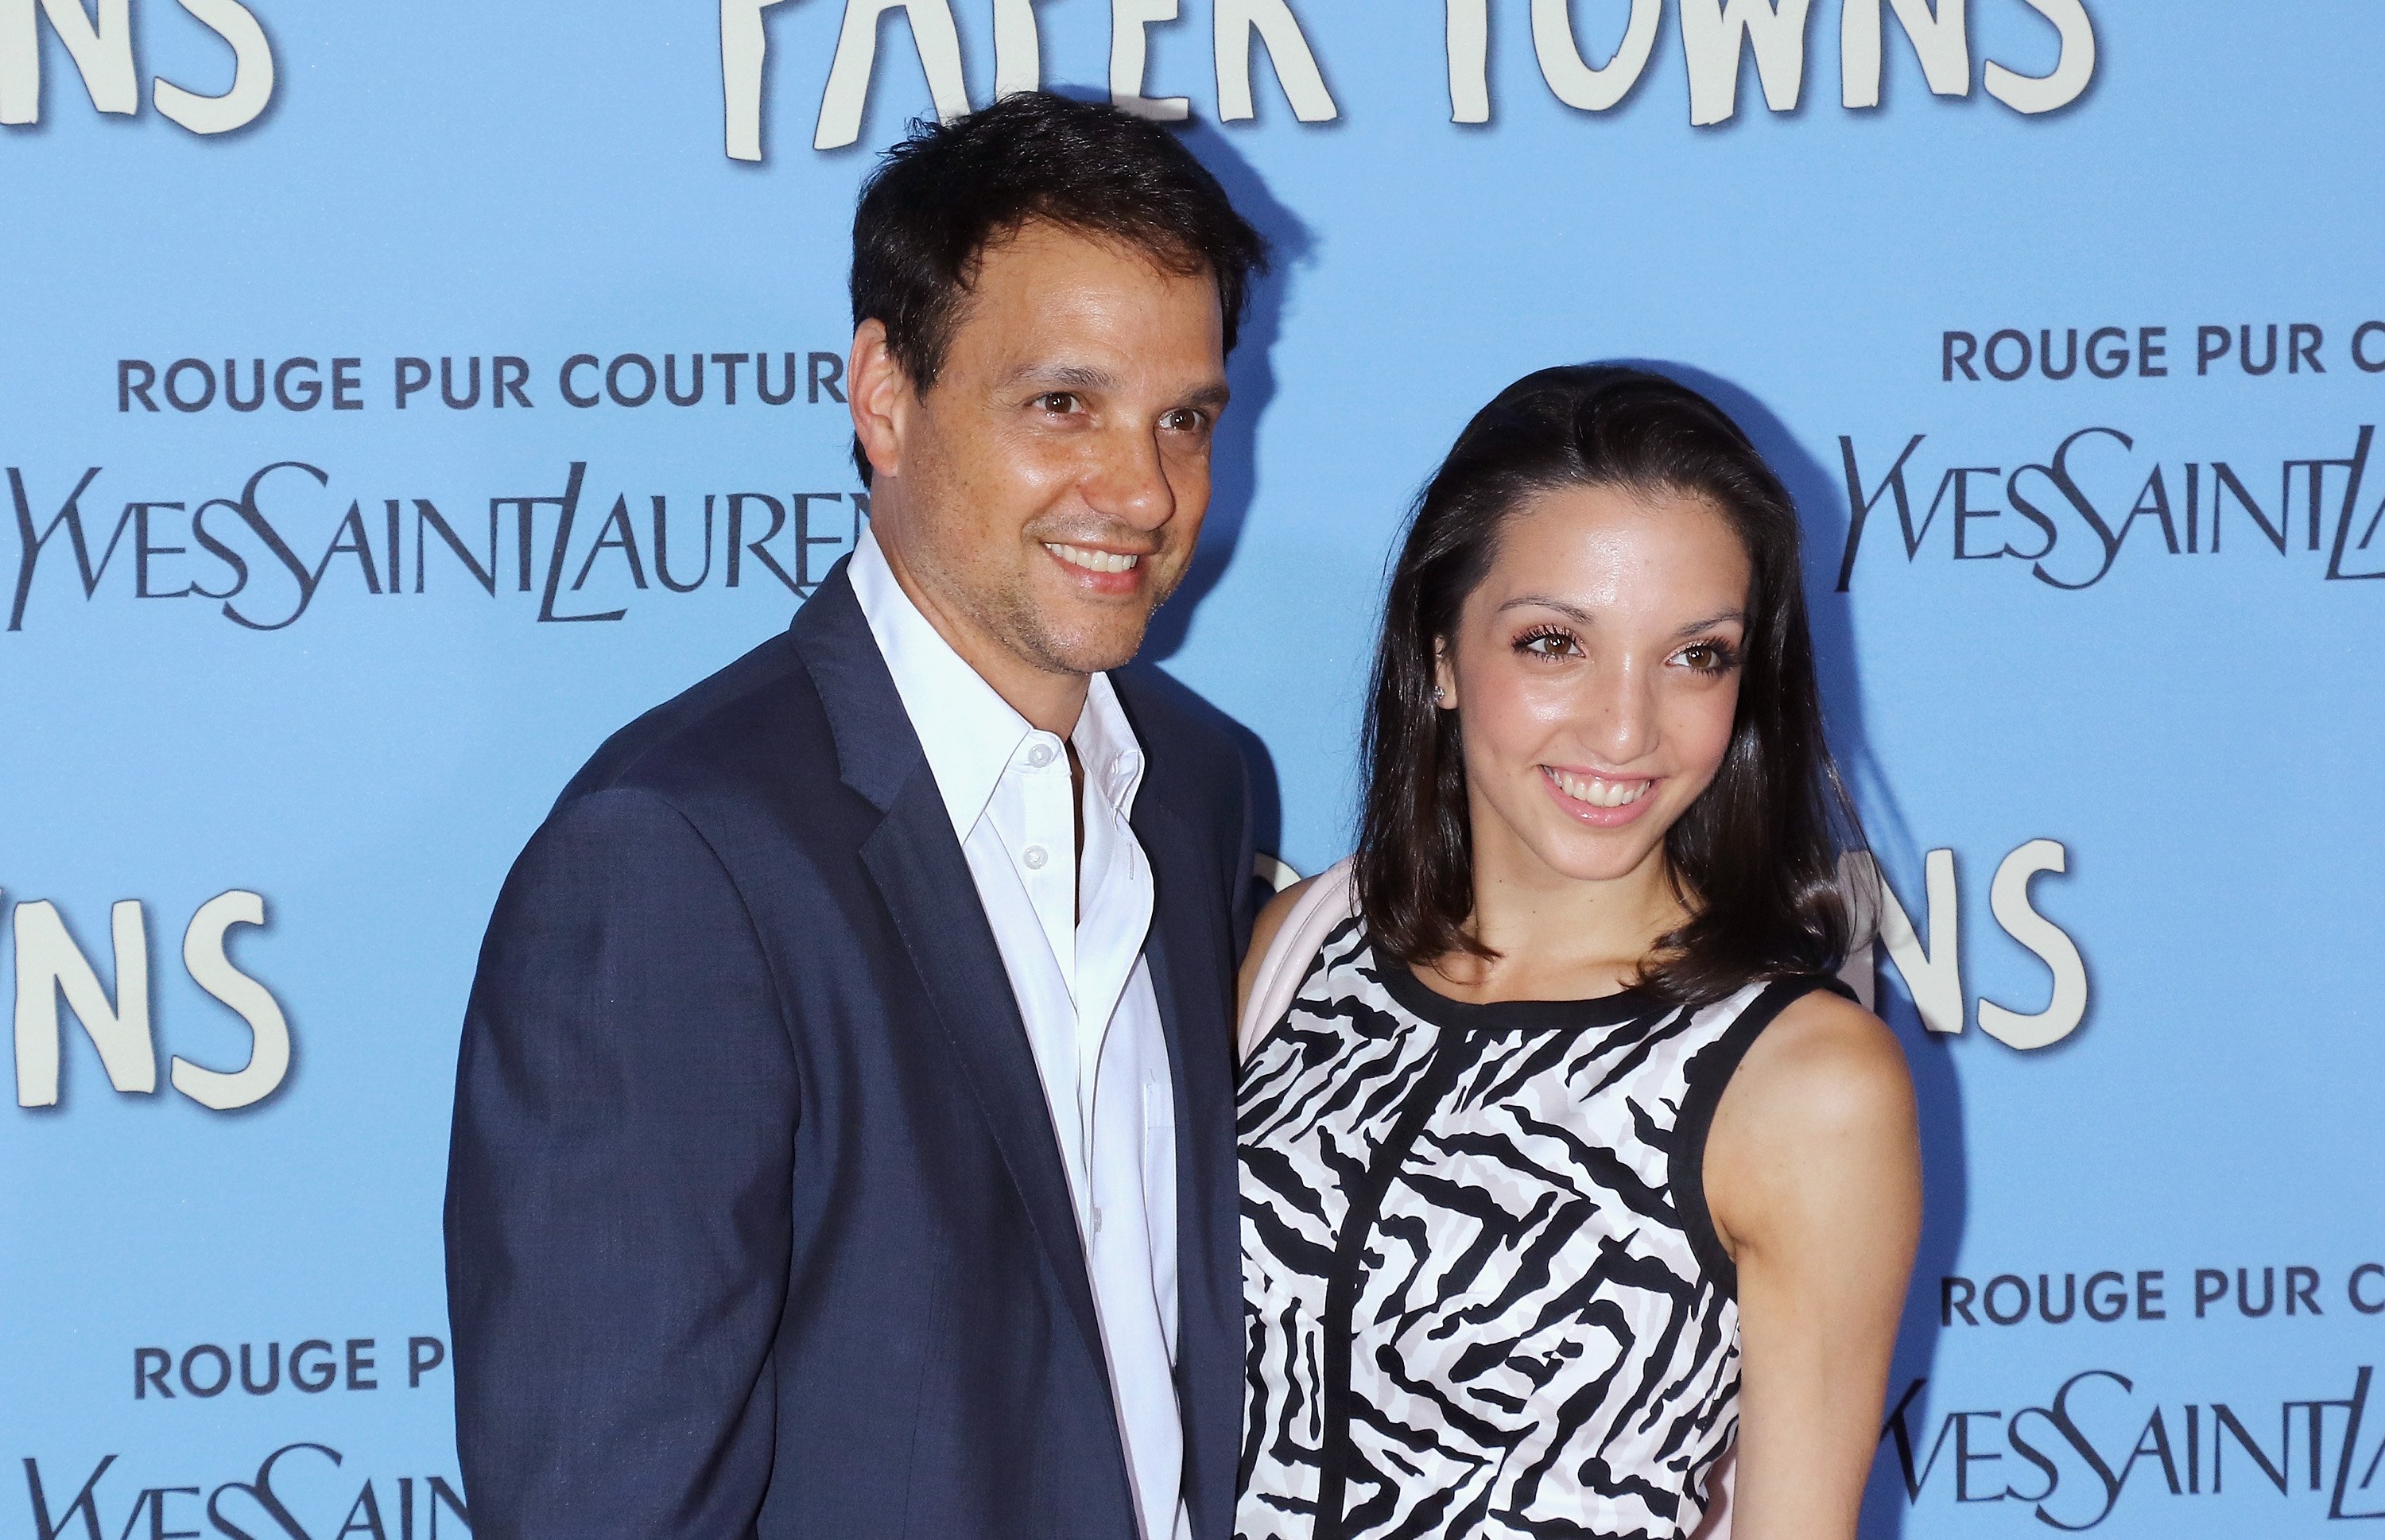 Actor Ralph Macchio and wife, Phyllis Fierro, attend the "Paper Towns" New York premiere at AMC Loews Lincoln Square on July 21, 2015 in New York City. | Source: Getty Images